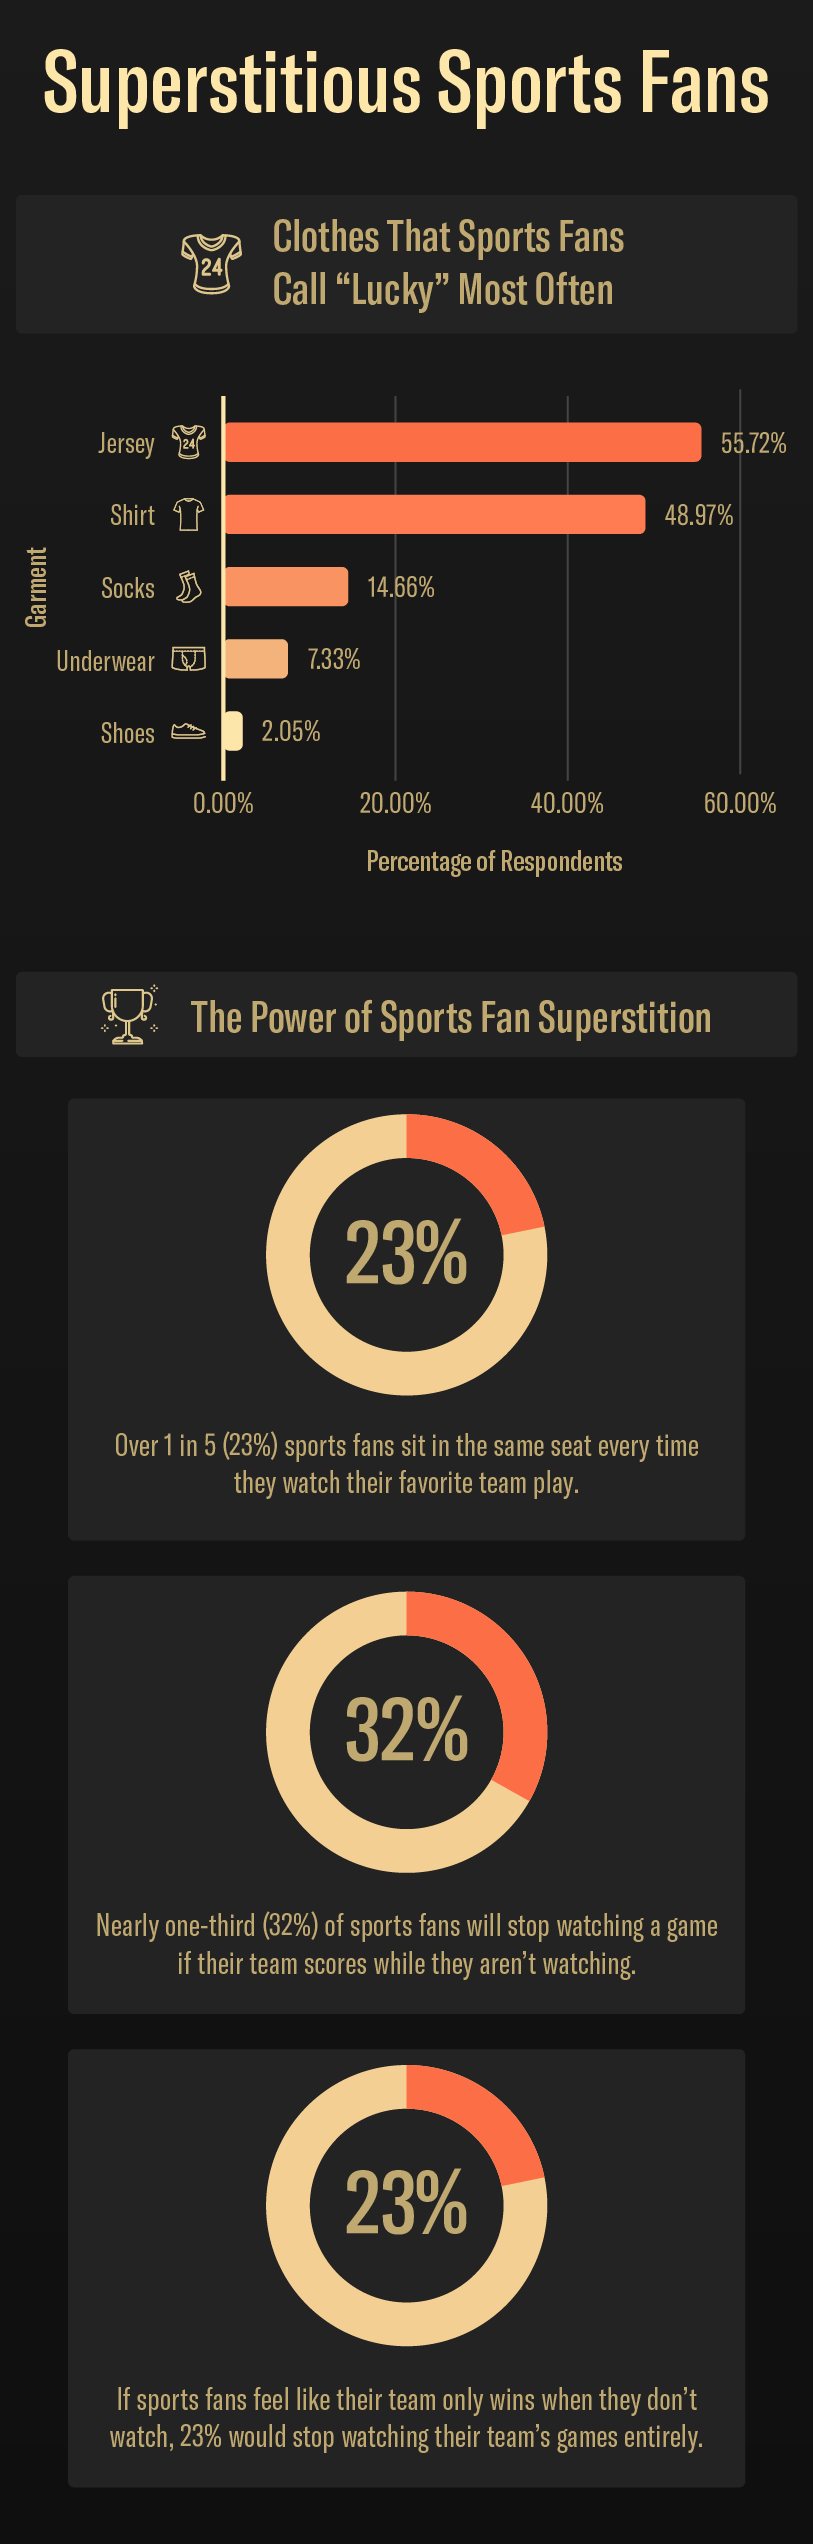 A-mobile-optimized-graphic-illustrating-survey-insights-about-sports-fans-and-superstitions2